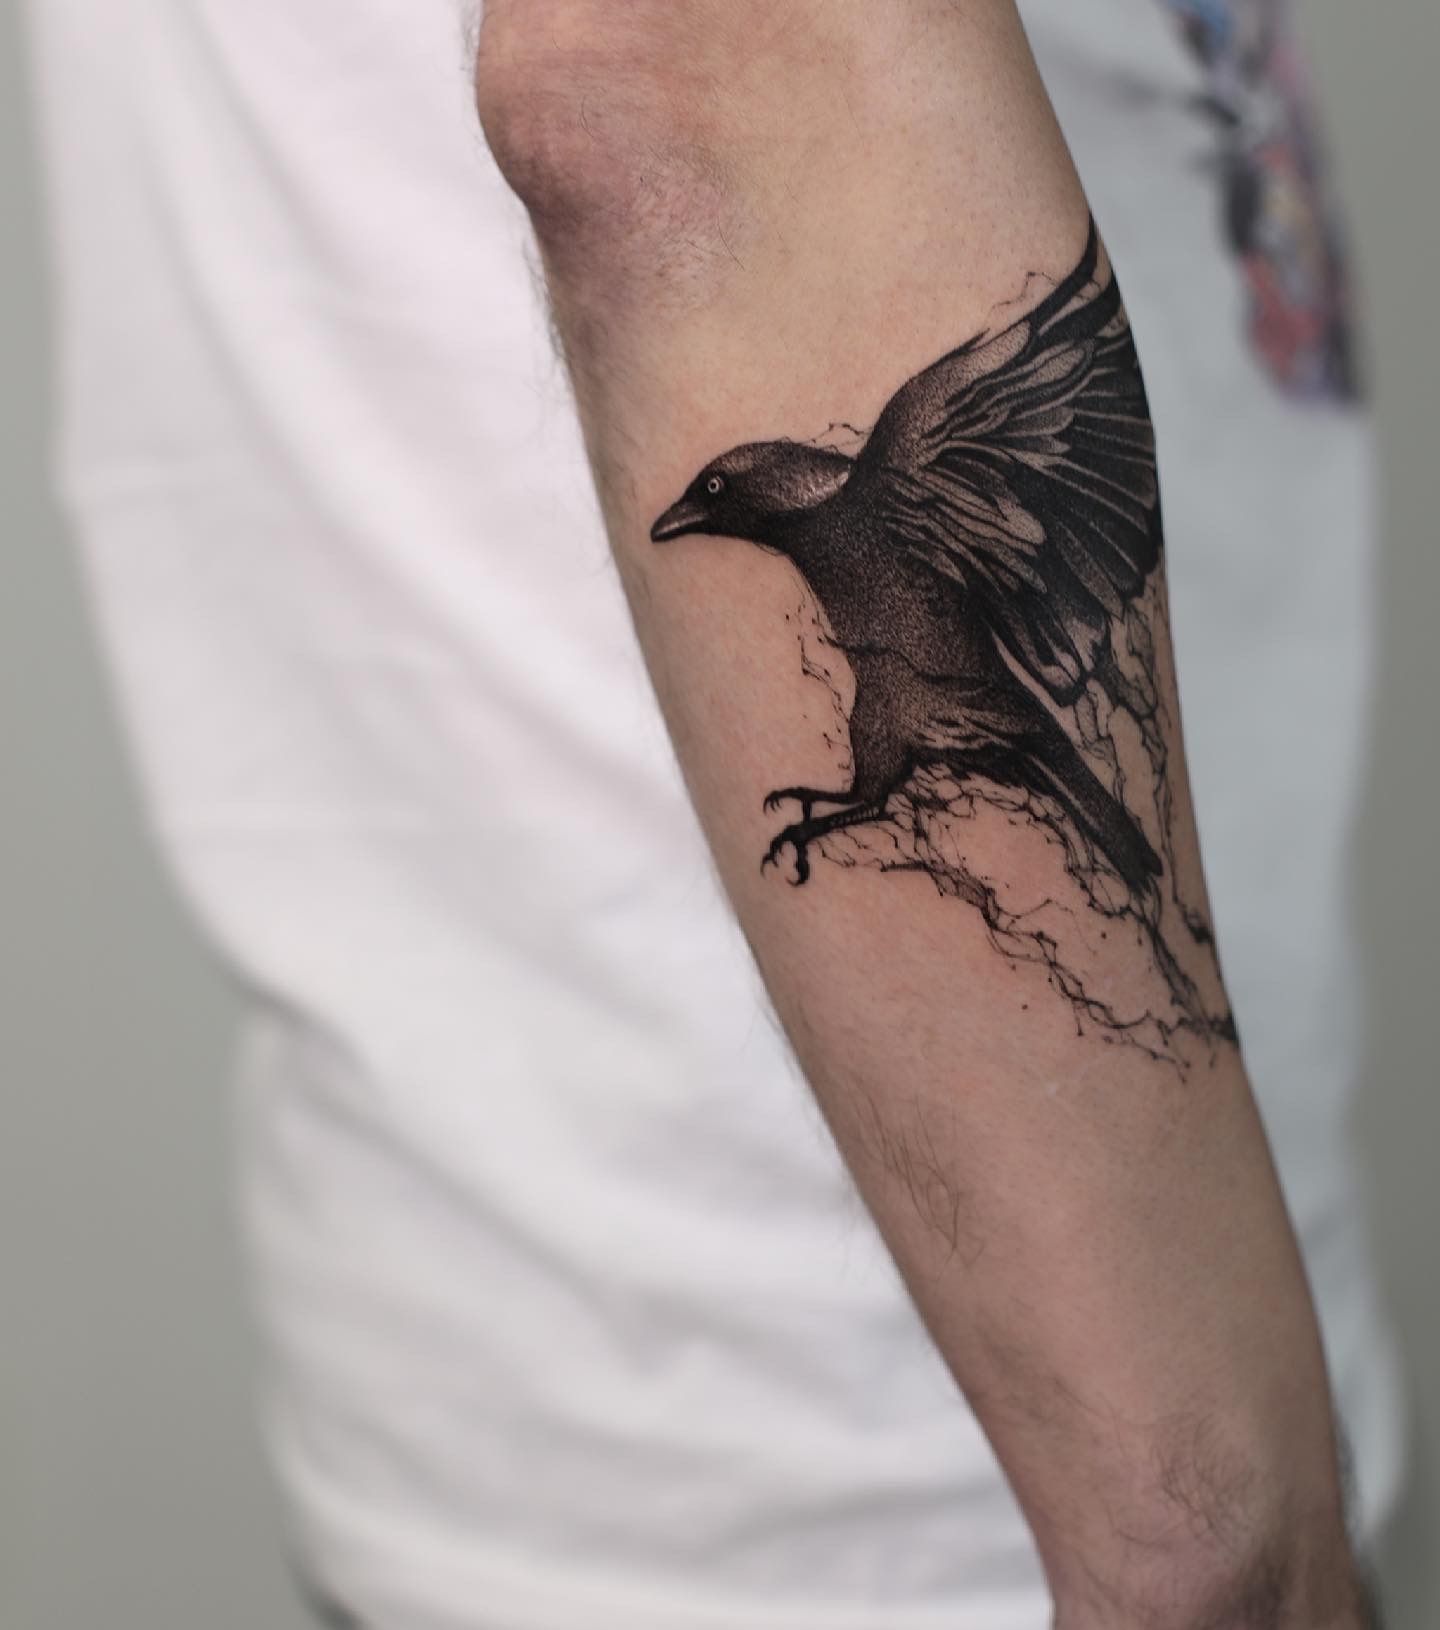 60 Best Bird Tattoos that Express Freedom, Wisdom, and Transformation -  Meanings, Ideas and Designs | Hand tattoos for guys, Small tattoos for  guys, Bird tattoo men